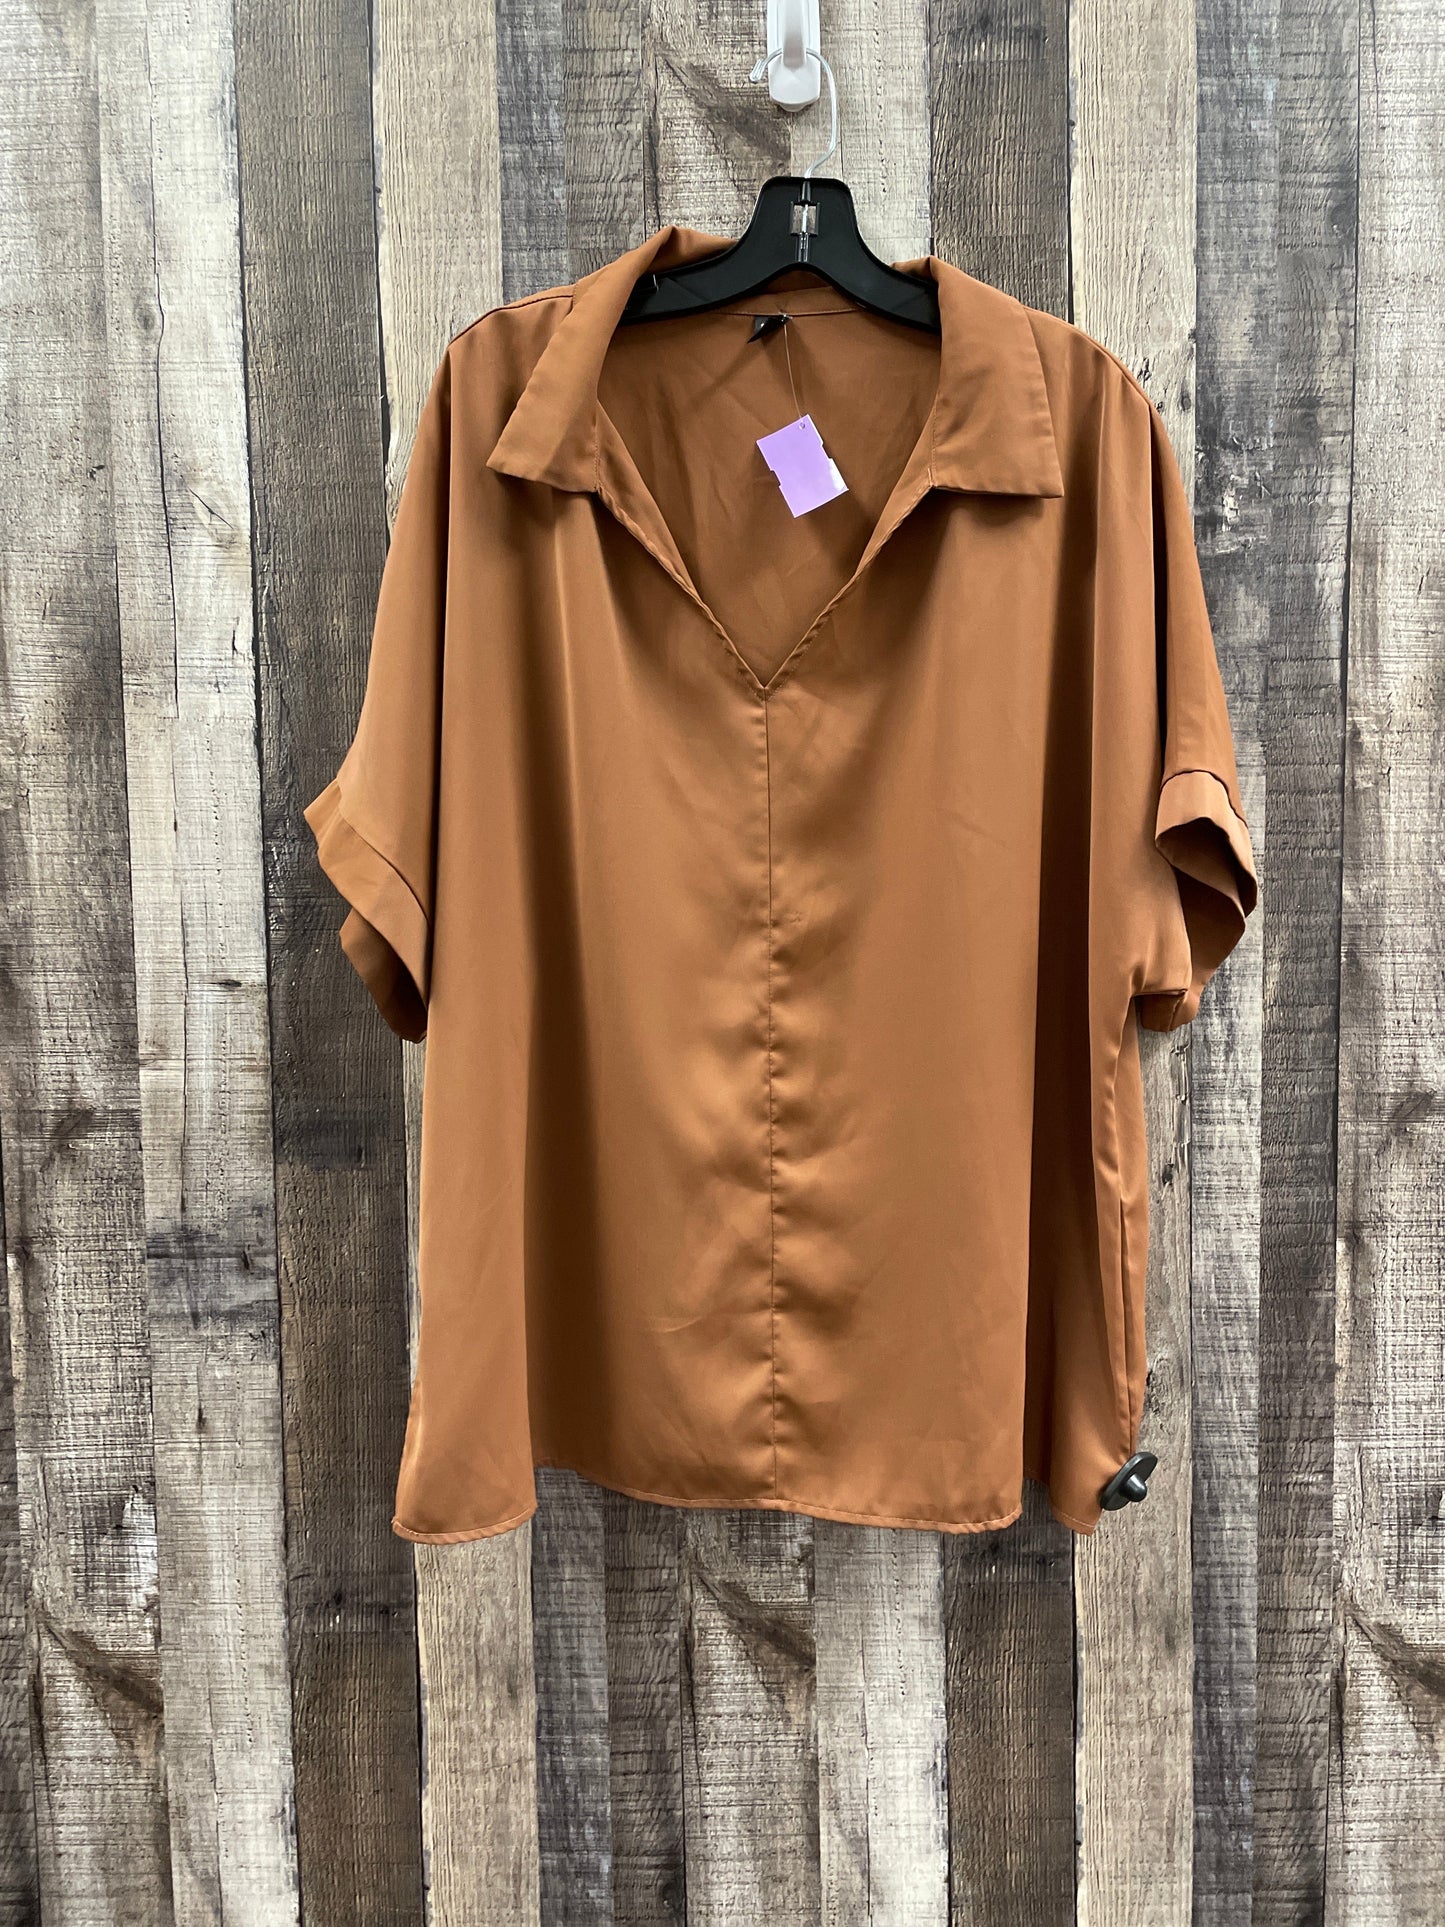 Brown Blouse Short Sleeve Shein, Size 2x